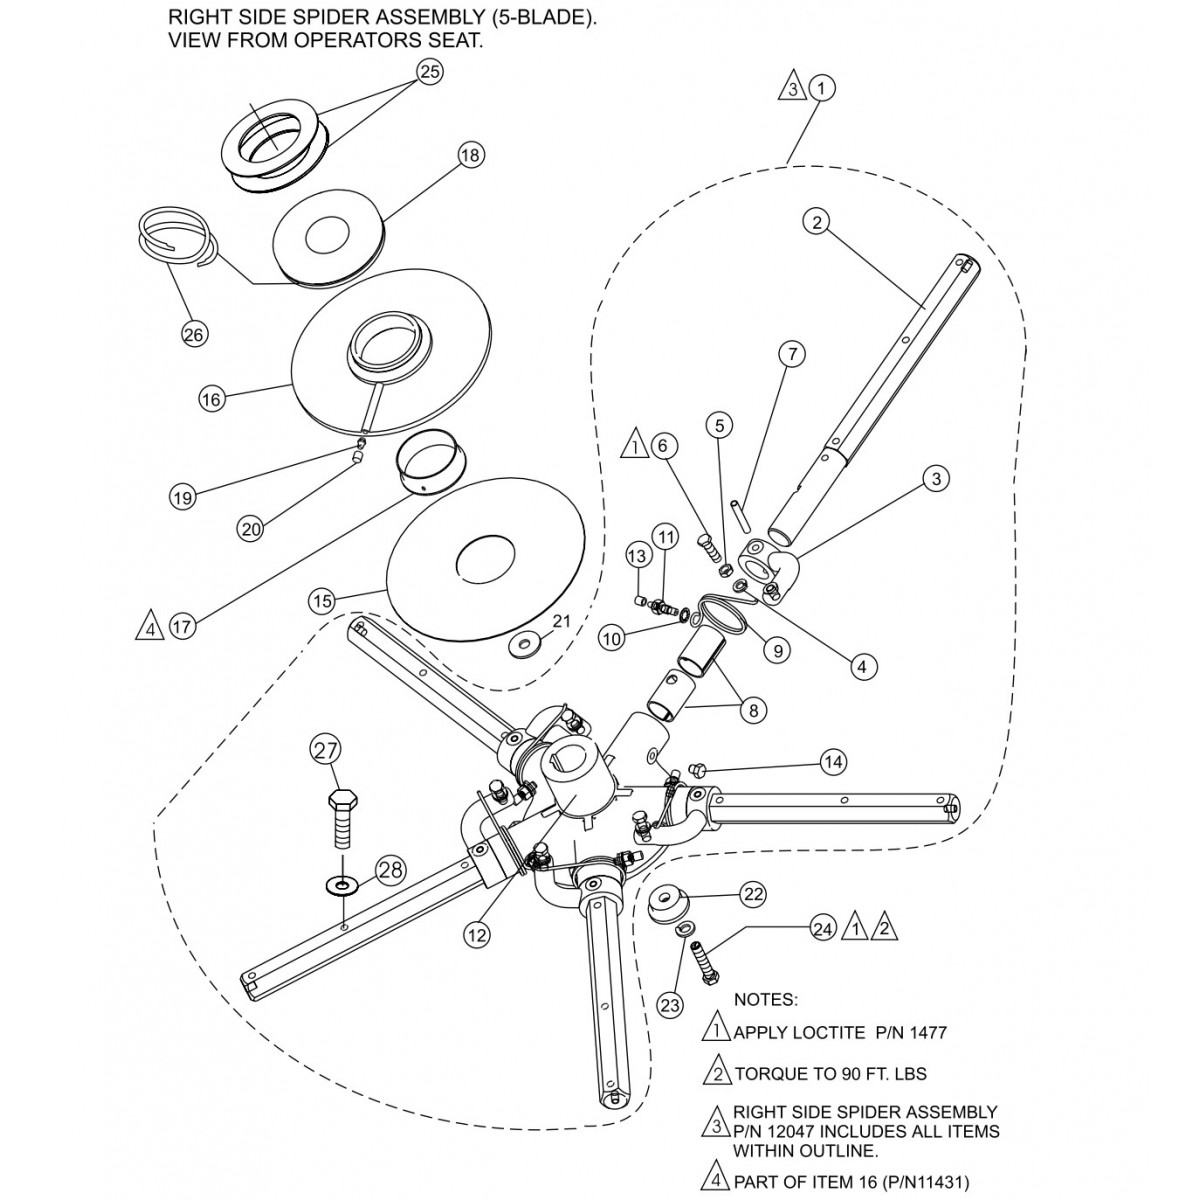 HTH — 5-Blade Spider (Right) Assembly Parts By Multiquip Whiteman